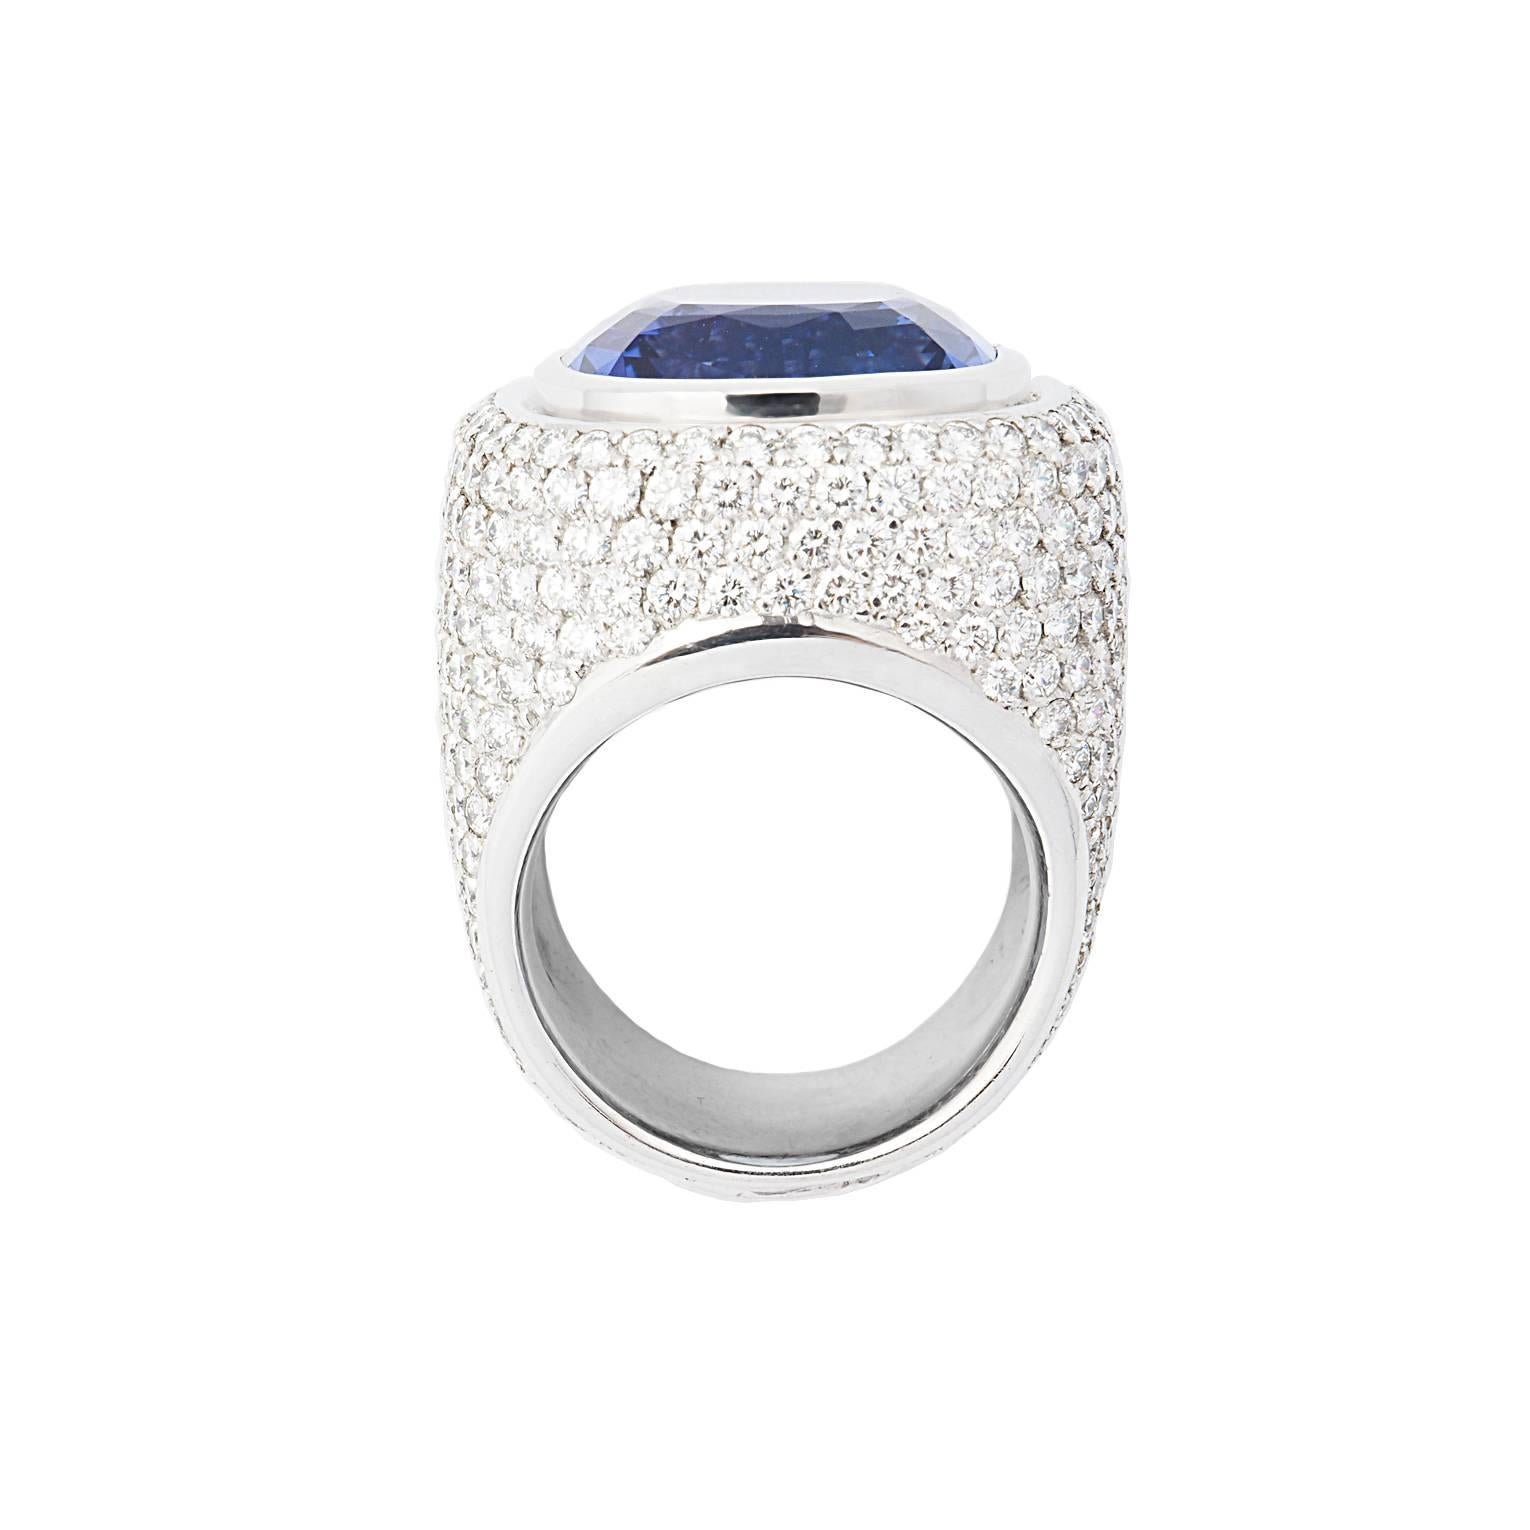 The beautiful midnight-blue tanzanite 22.35 ct and 6.71 ct TW/if brilliant cut diamonds make this ring to an impressive eye catcher. Ring size: 56
Designed by Colleen B. Rosenblat
